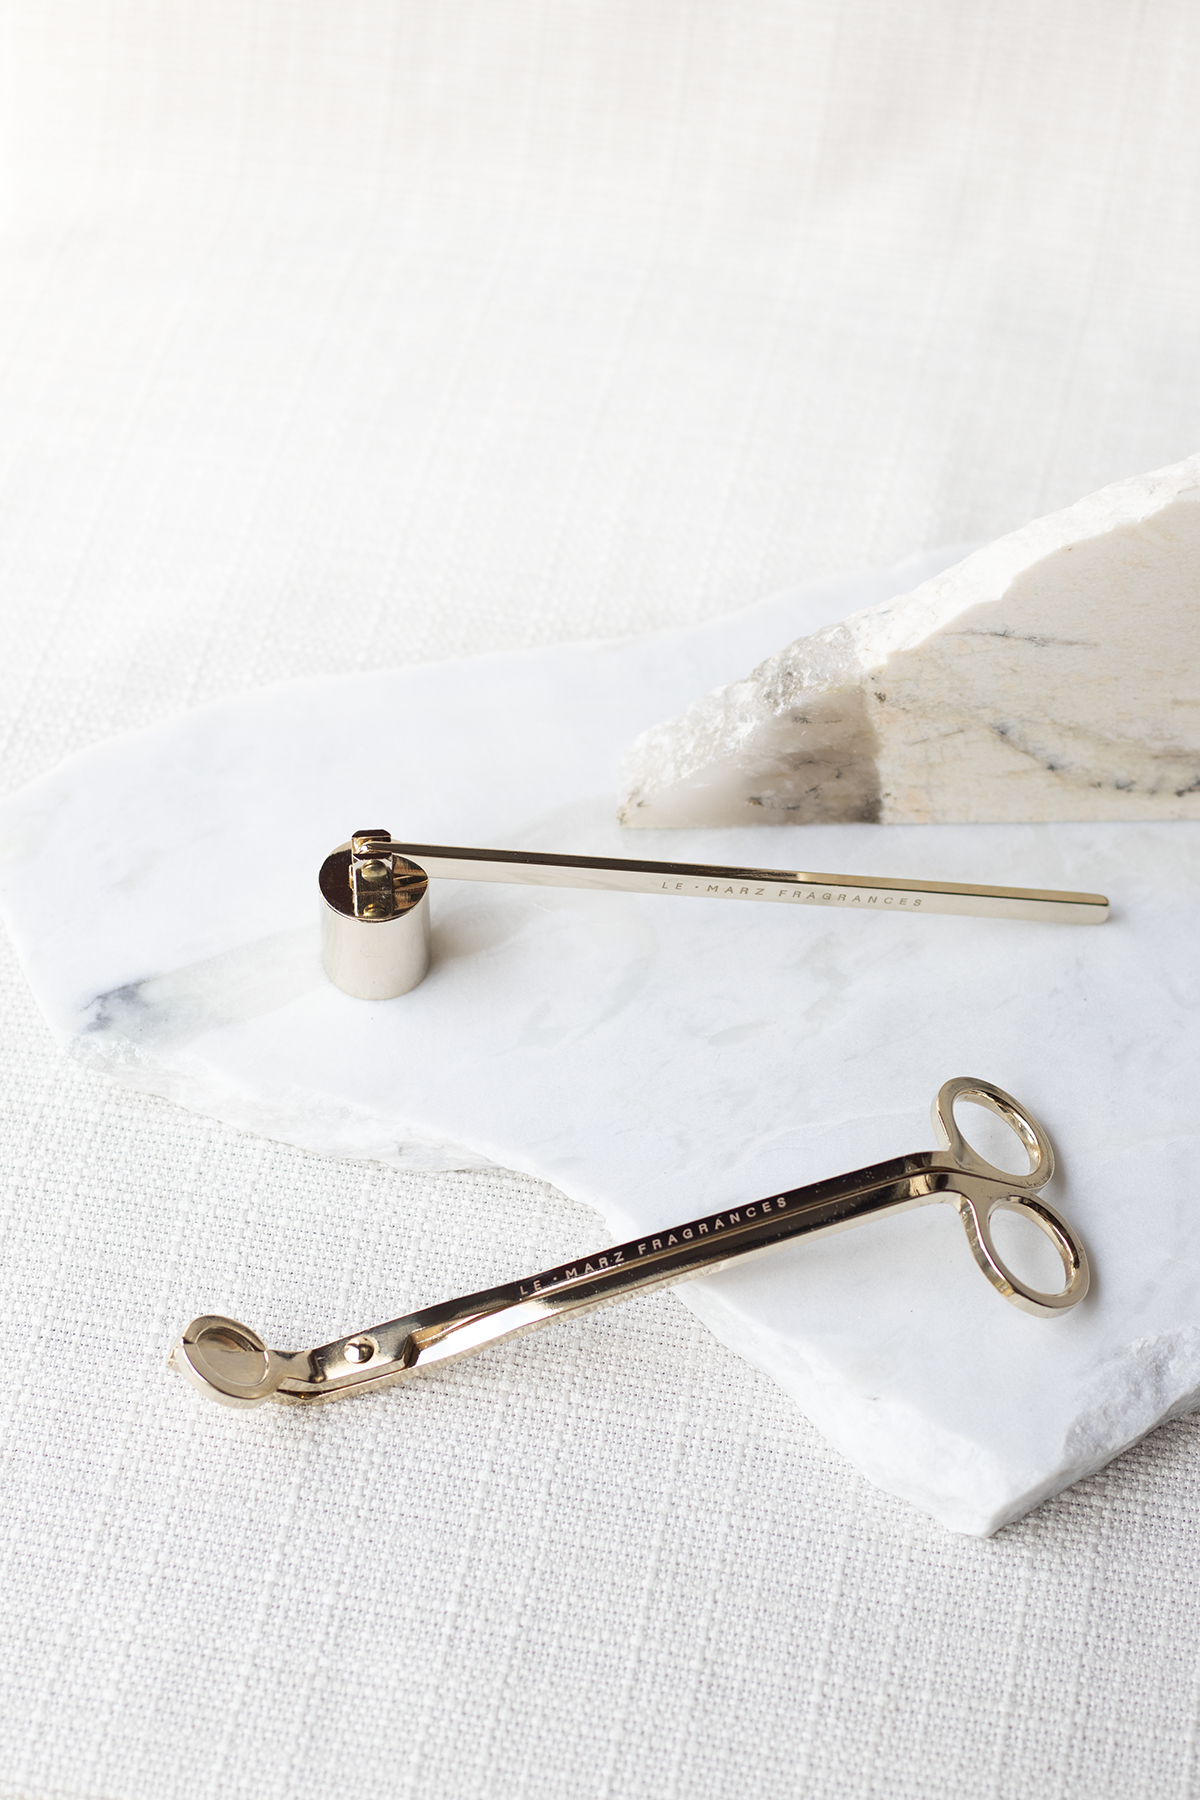 Wick Trimmer & Candle Snuffer Set